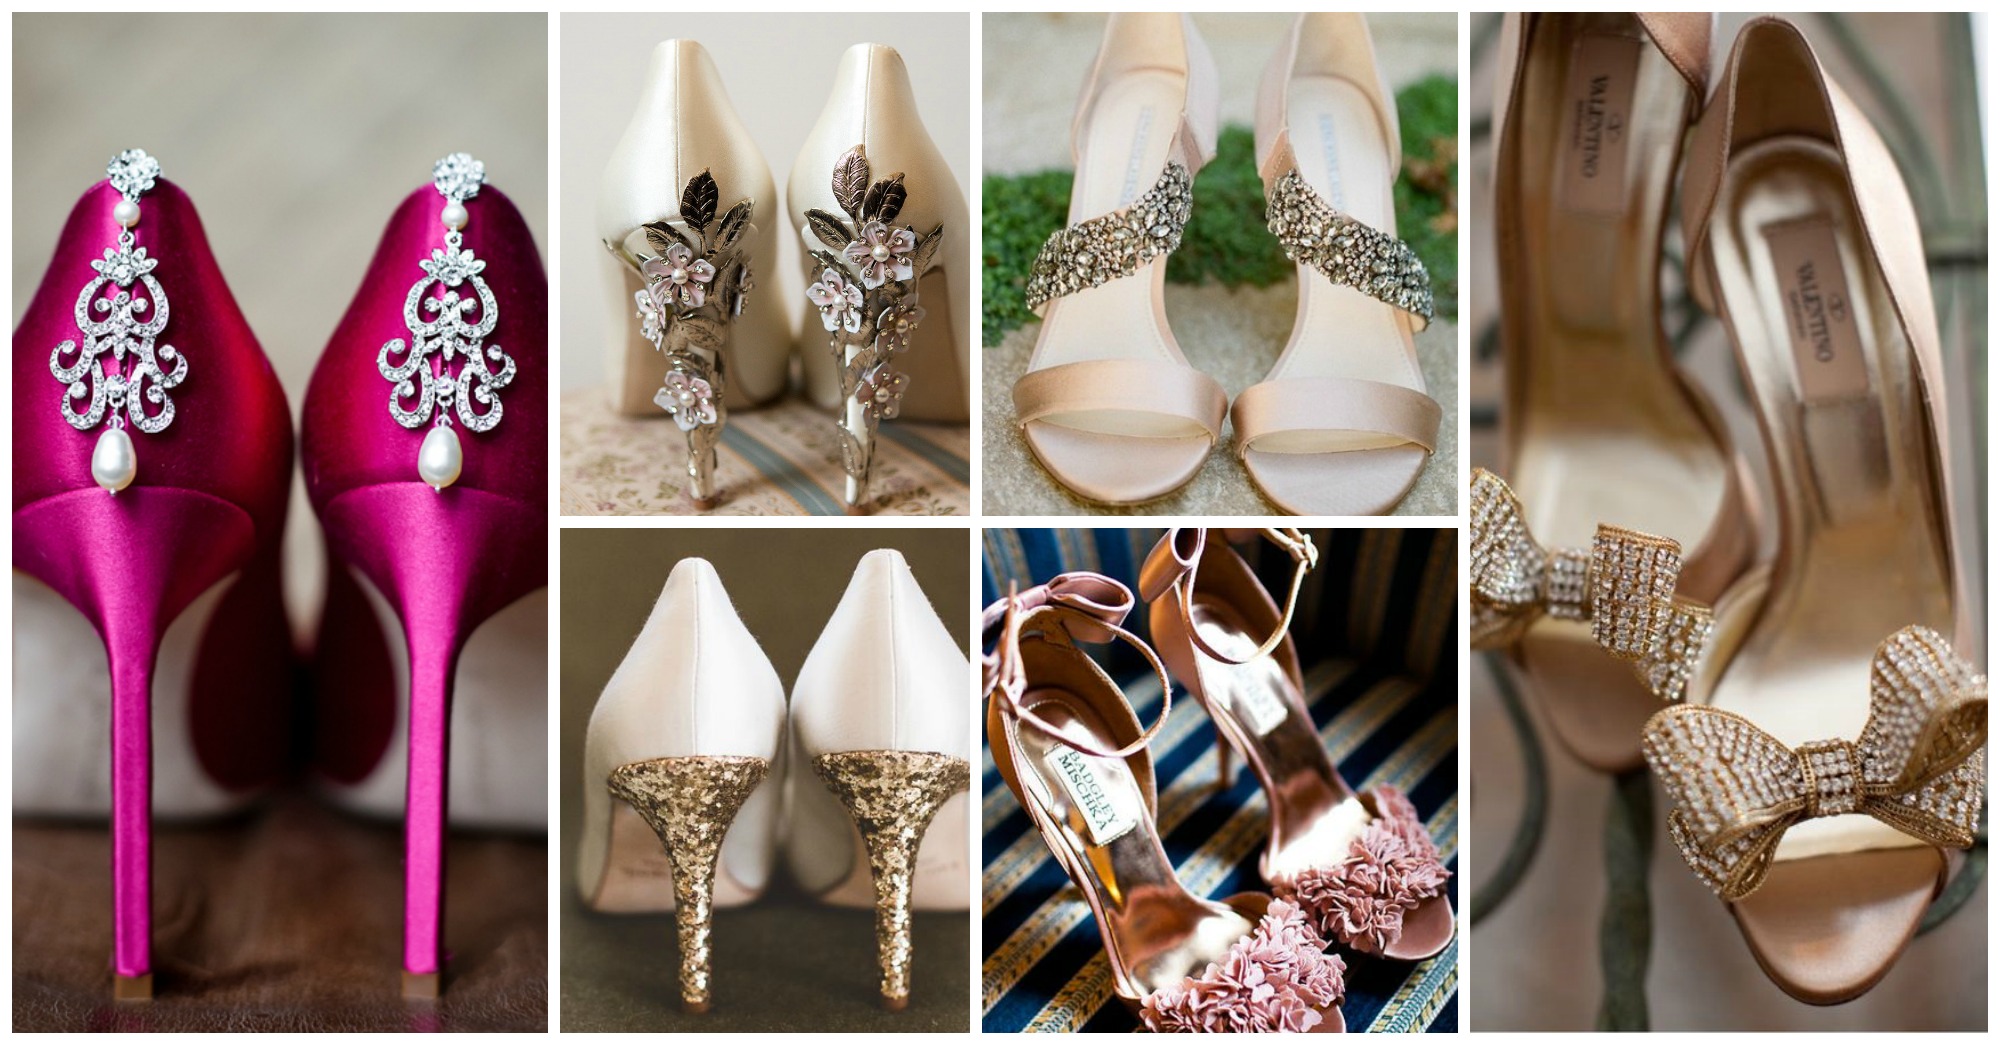 10 Fabulous DIY Wedding Shoes Every Bride Should See